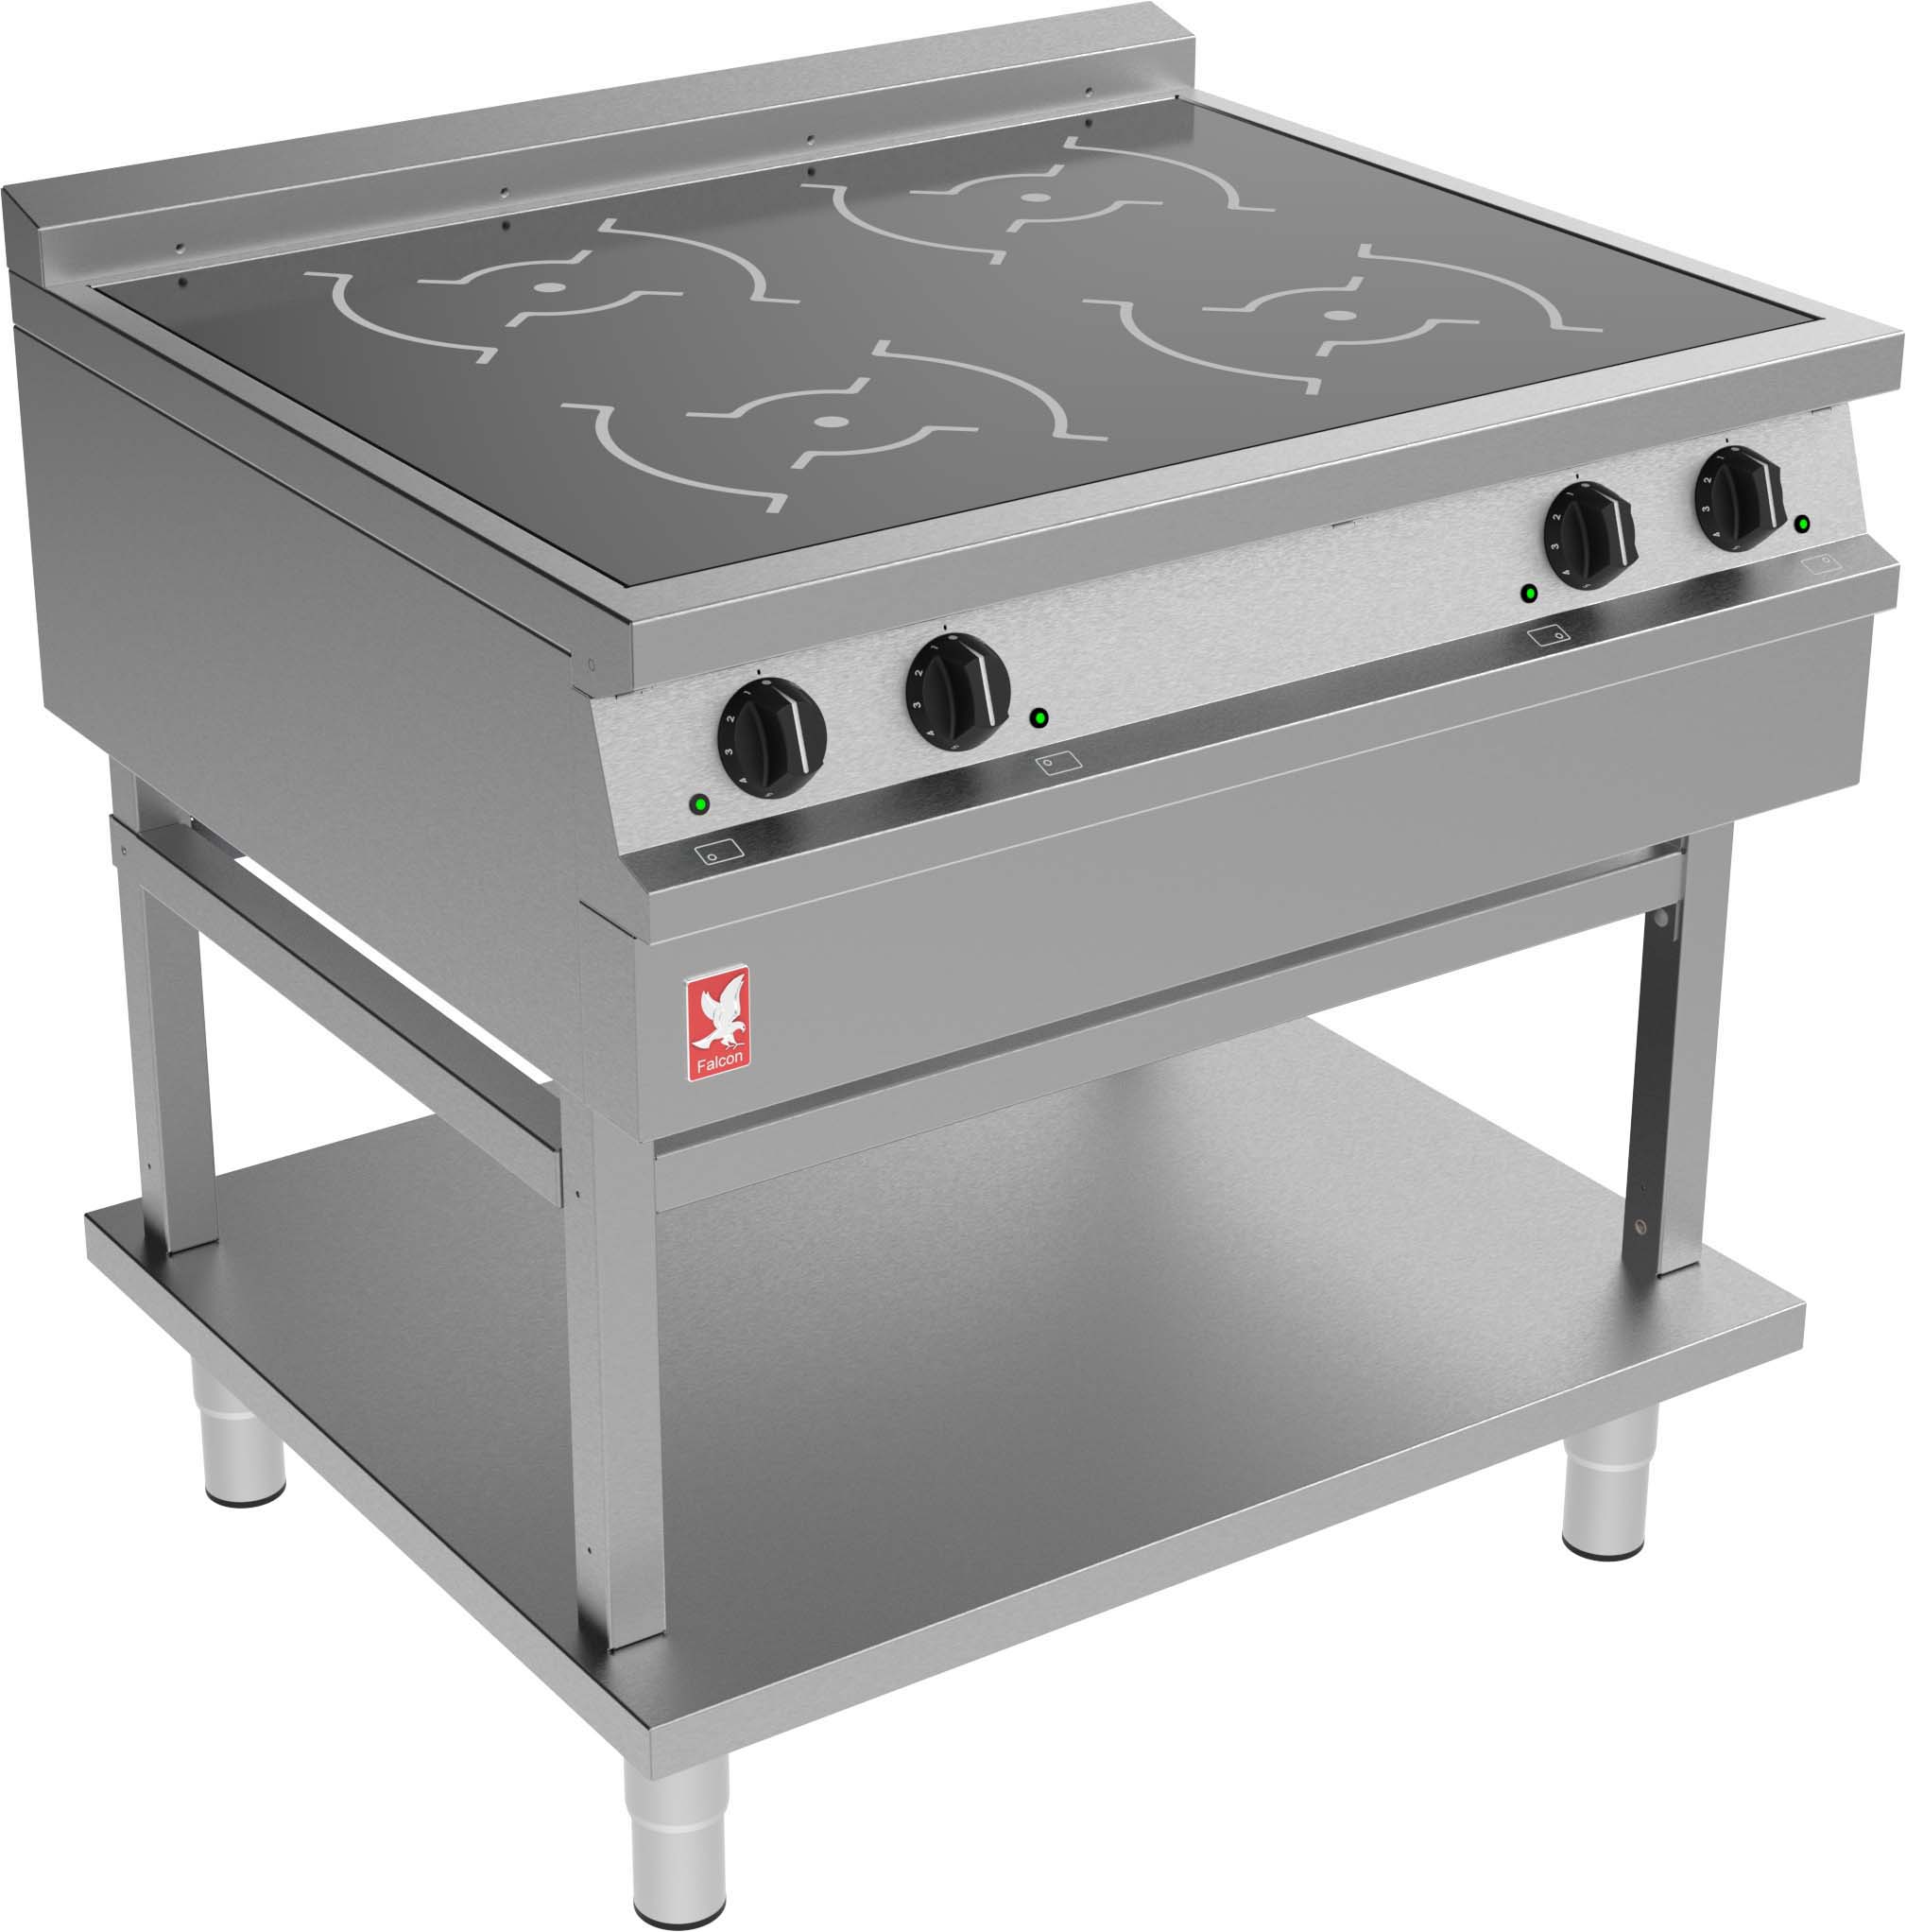 Overview :: Falcon Foodservice Equipment